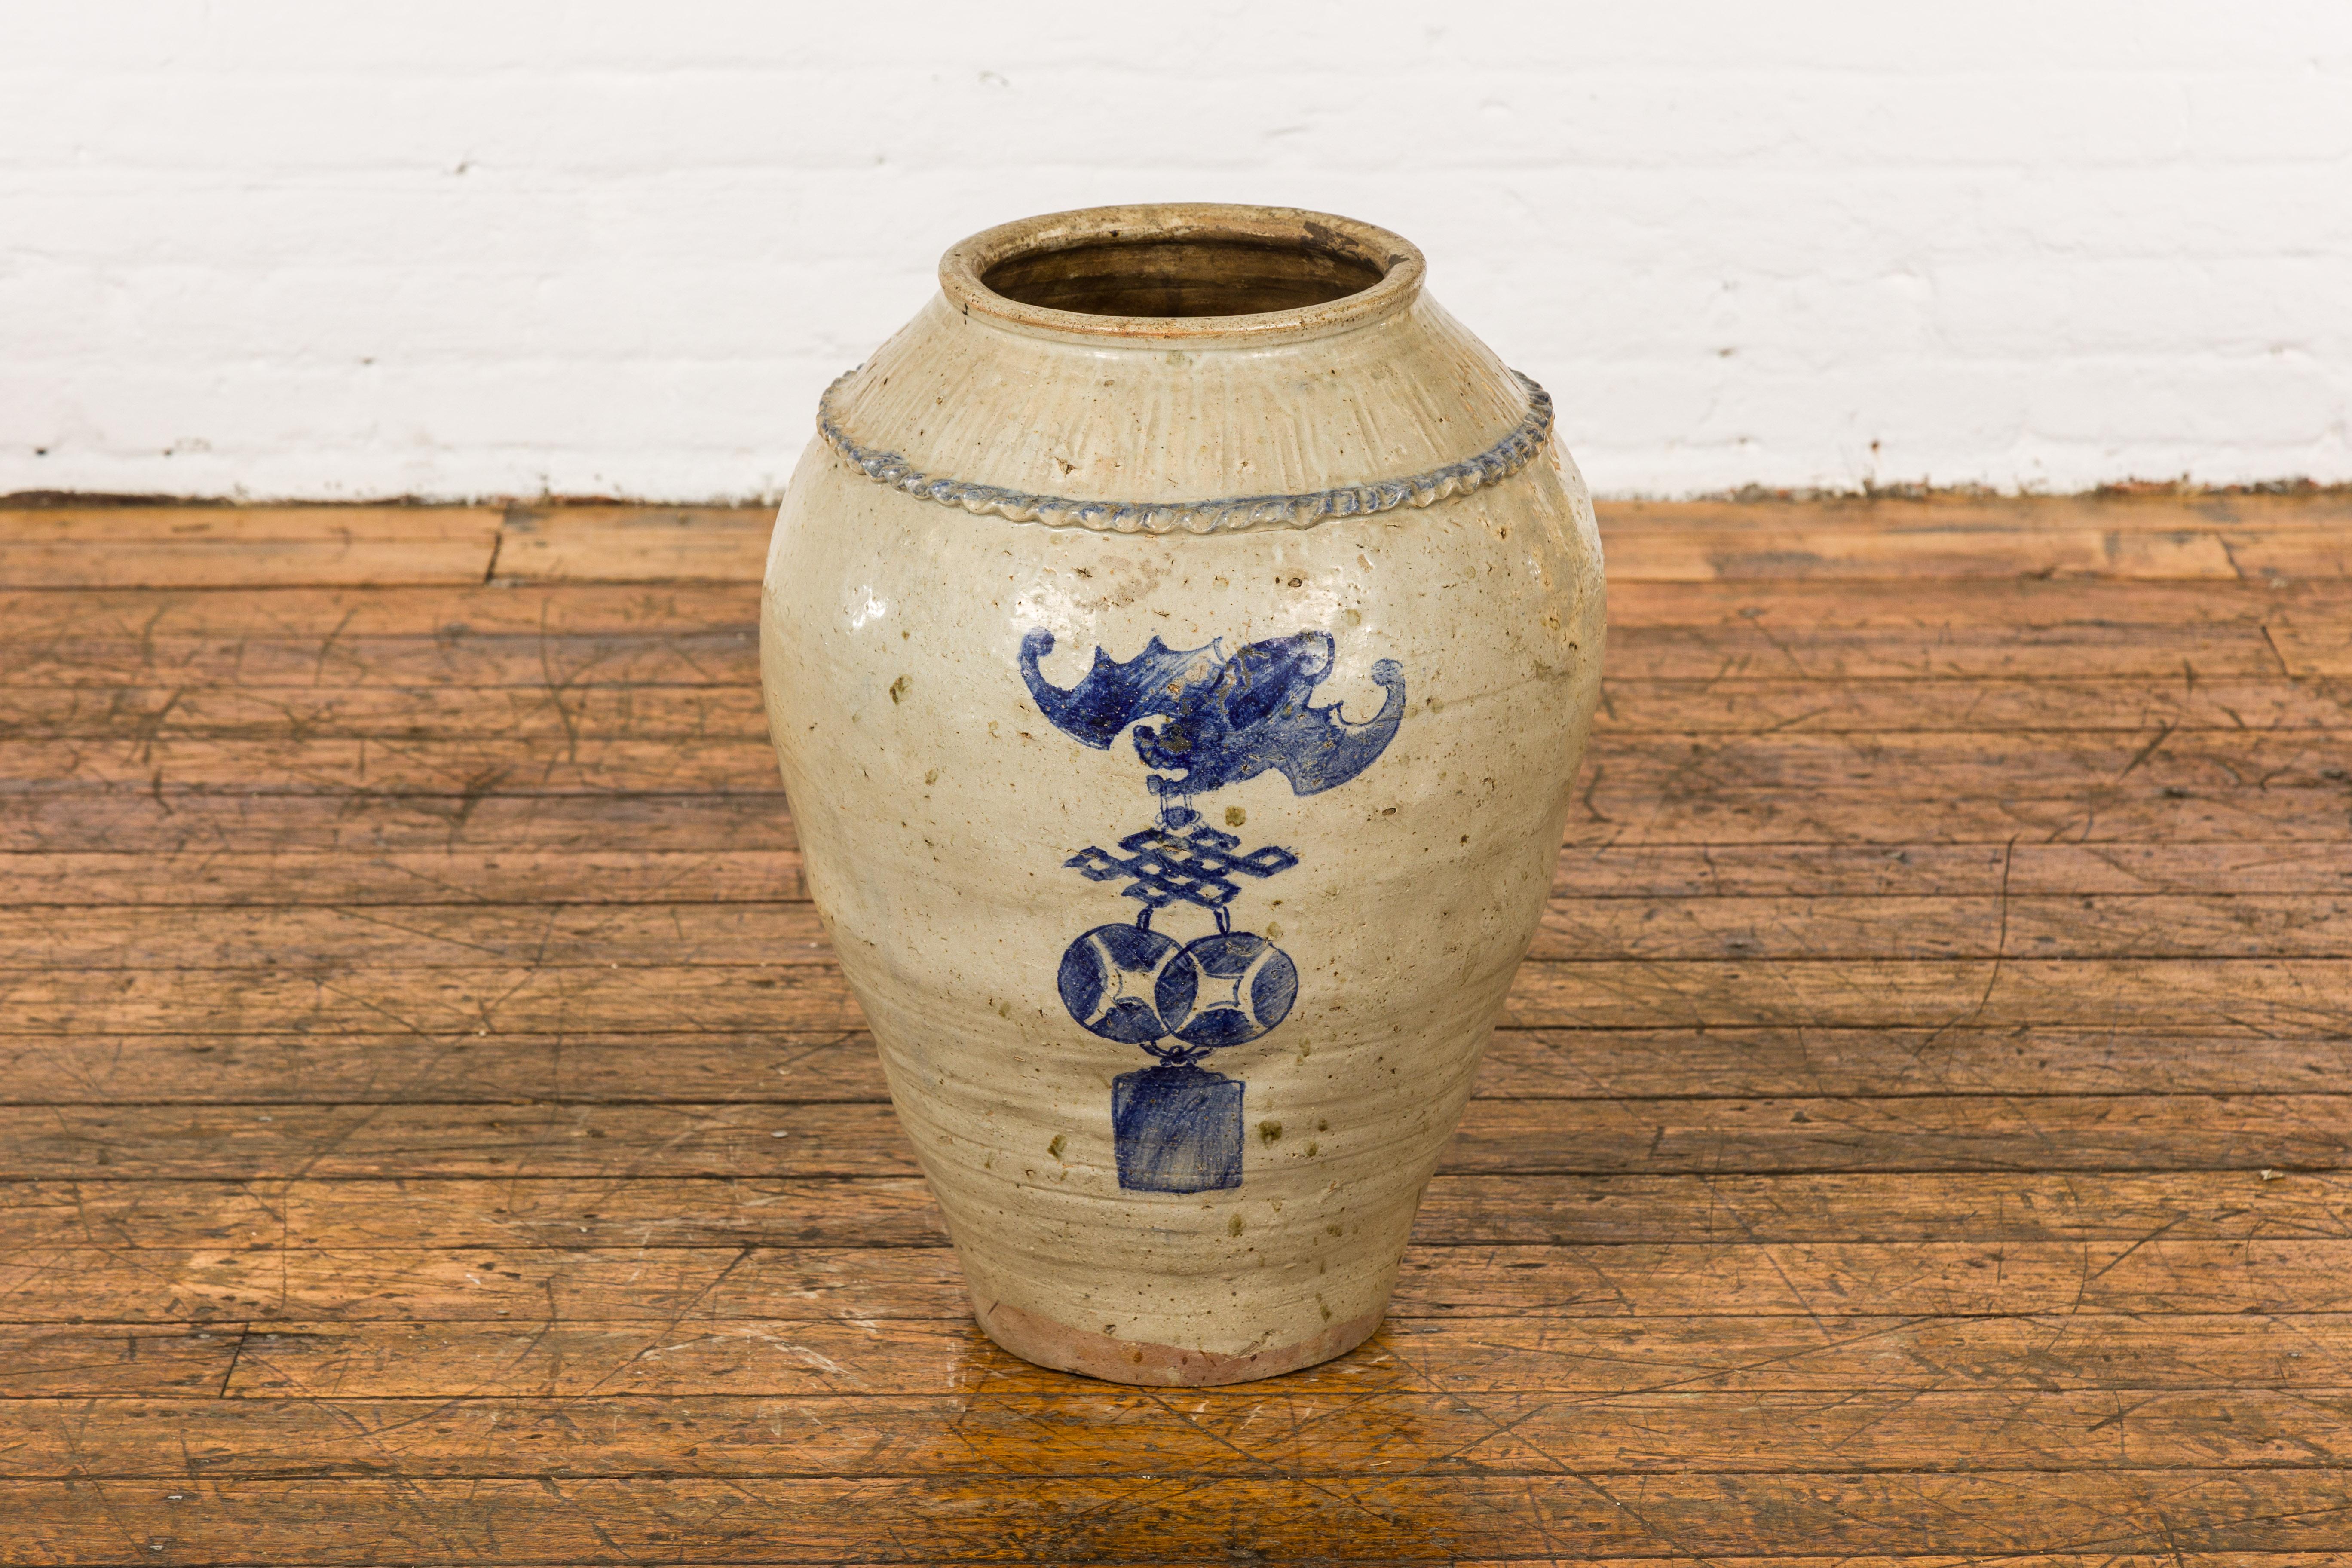 Antique Chinese Glazed Ceramic Storage Jar with Blue Painted Motifs In Good Condition For Sale In Yonkers, NY